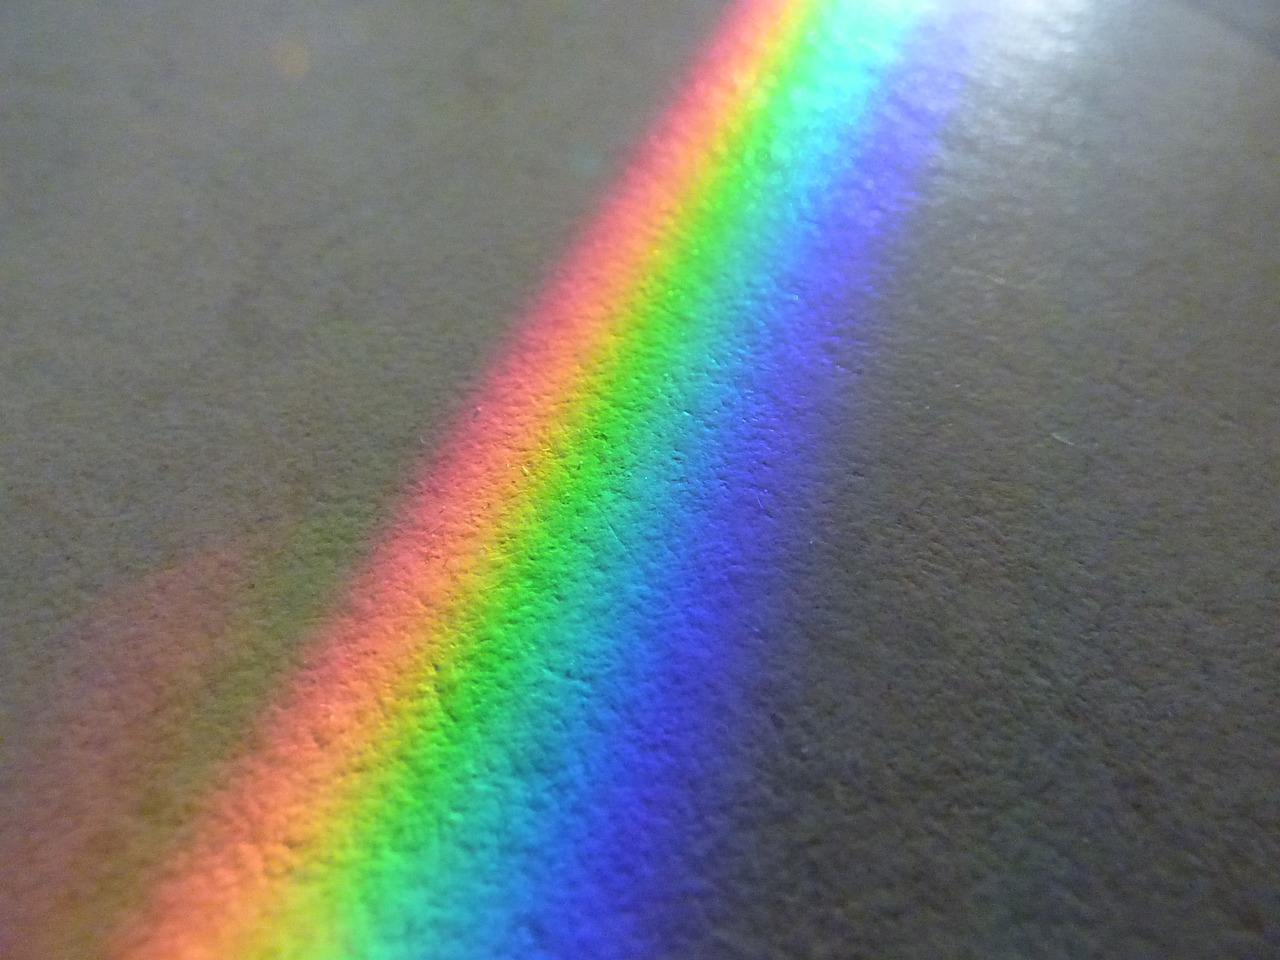 a rainbow shines brightly on the floor of a room, pexels, holography, high resolution macro photo, obama prism, closeup photo, iphone detailed photo